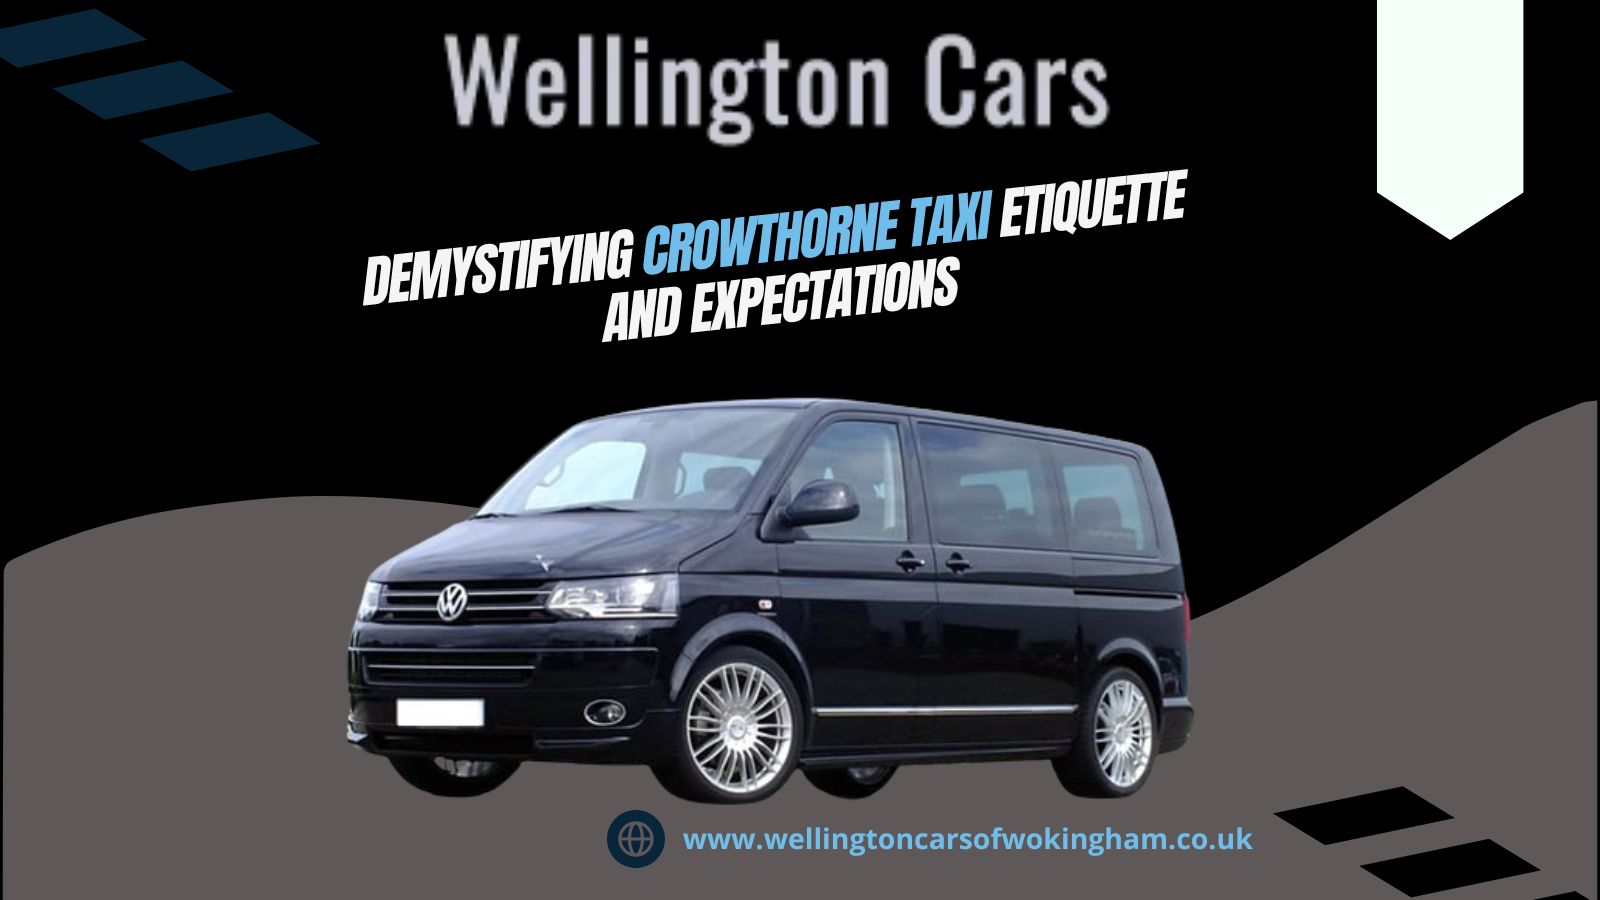 Crowthorne Taxi